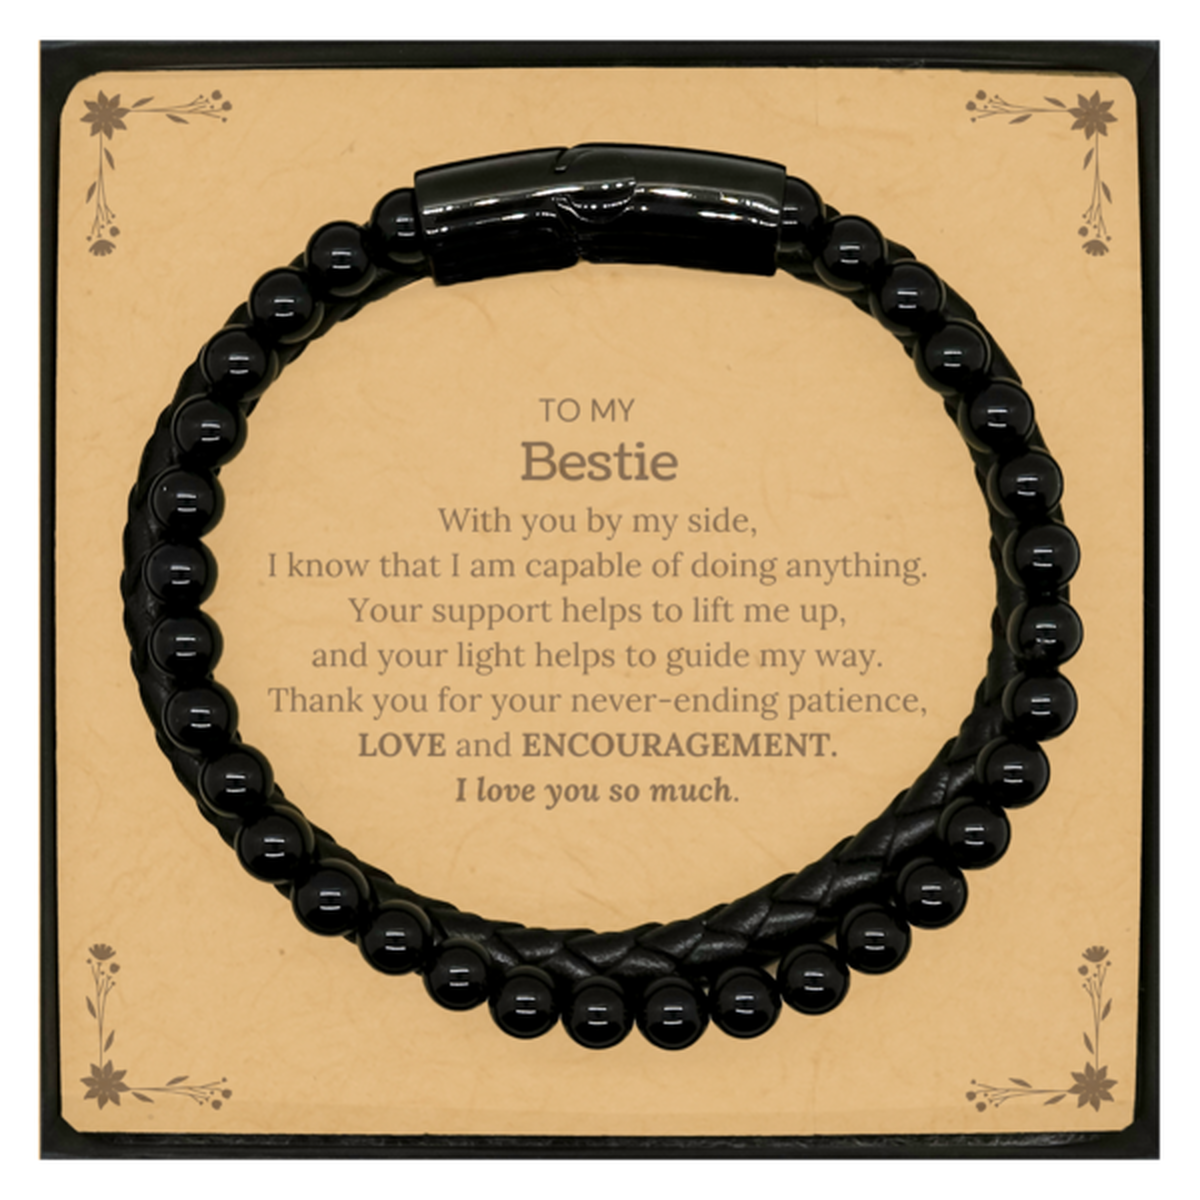 Appreciation Bestie Stone Leather Bracelets Gifts, To My Bestie Birthday Christmas Wedding Keepsake Gifts for Bestie With you by my side, I know that I am capable of doing anything. I love you so much